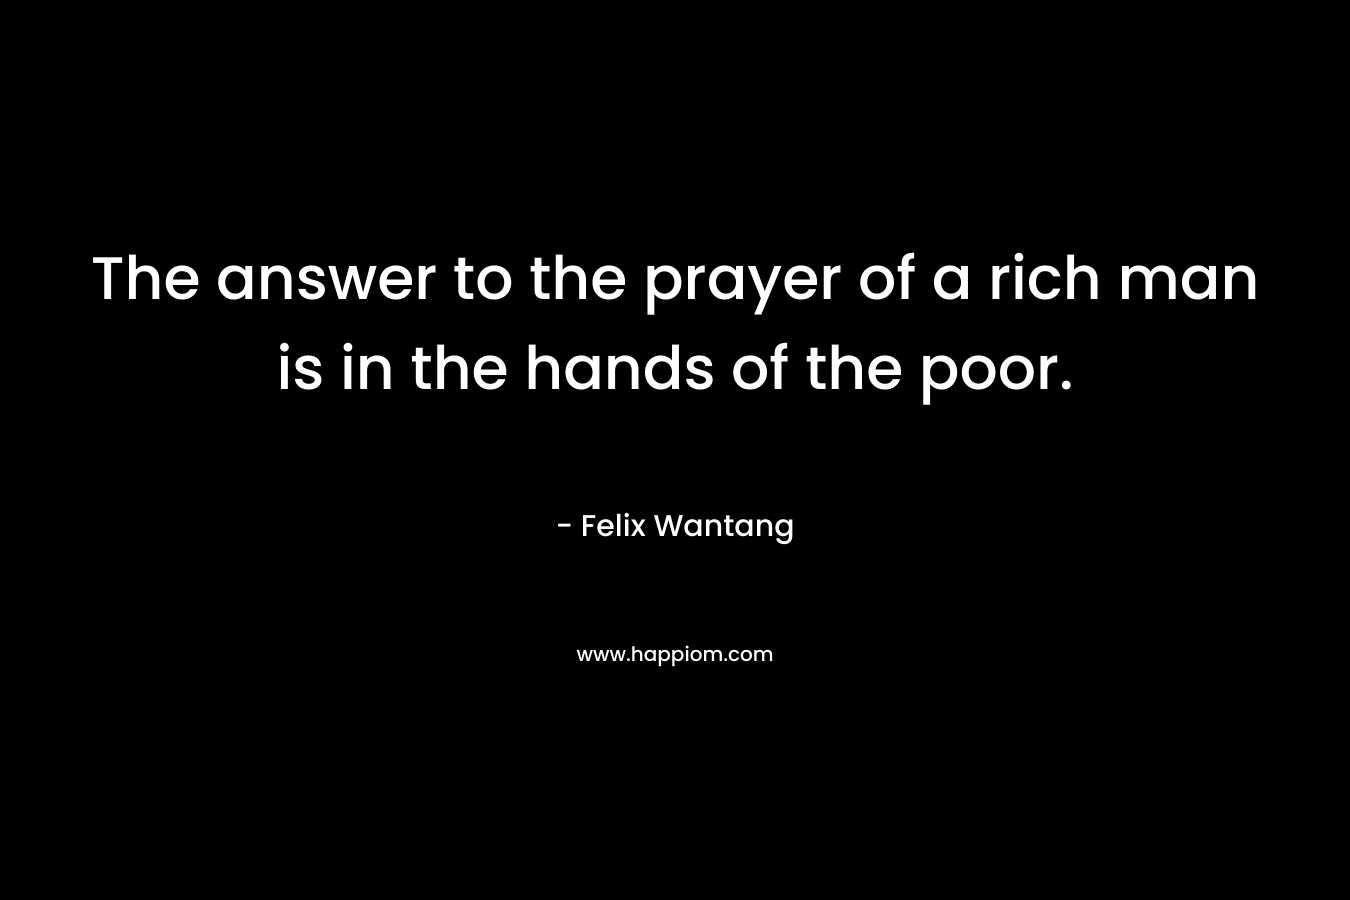 The answer to the prayer of a rich man is in the hands of the poor.